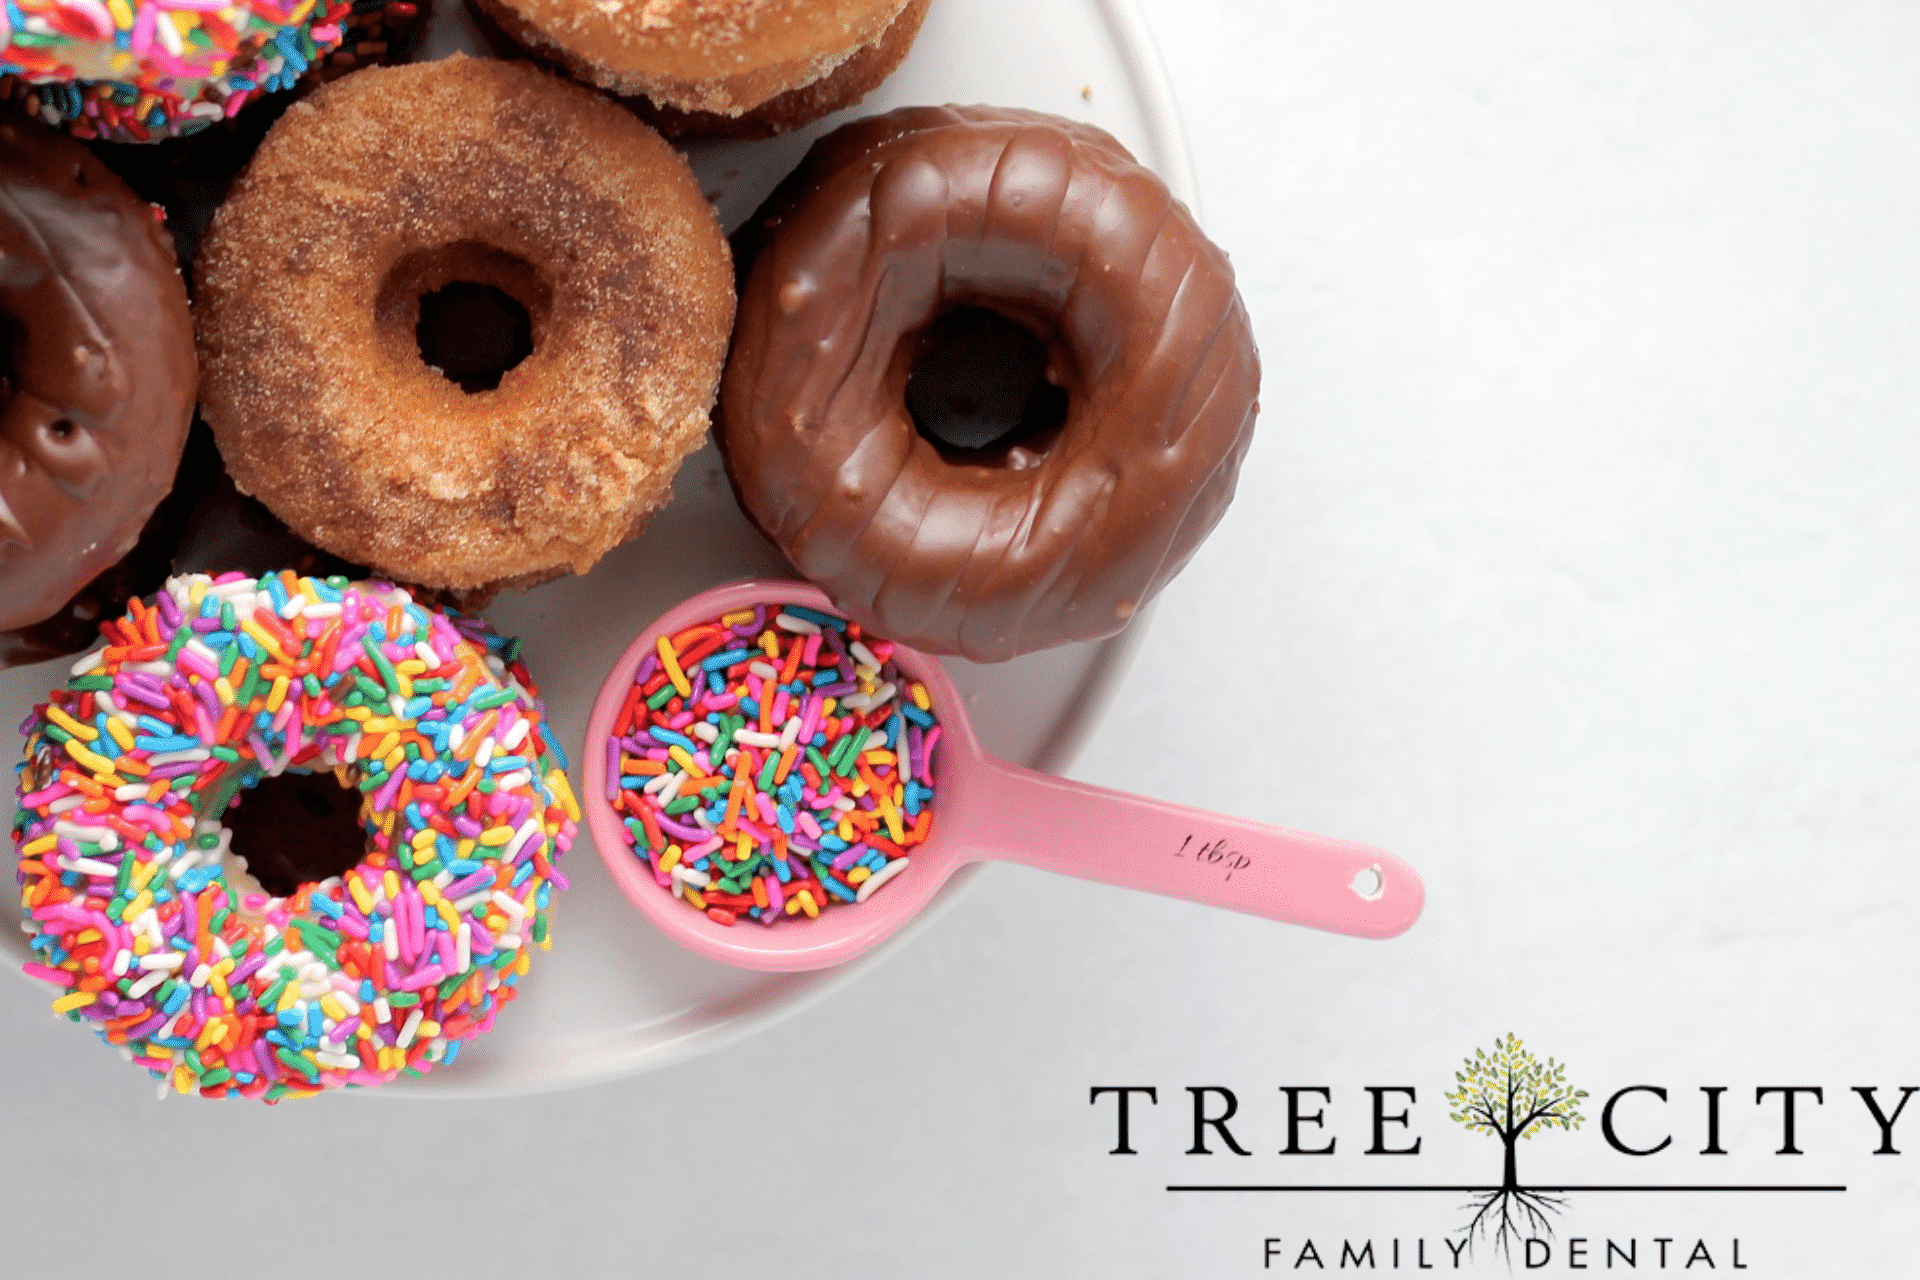 A plate of doughnuts and a tablespoon full of sprinkles.